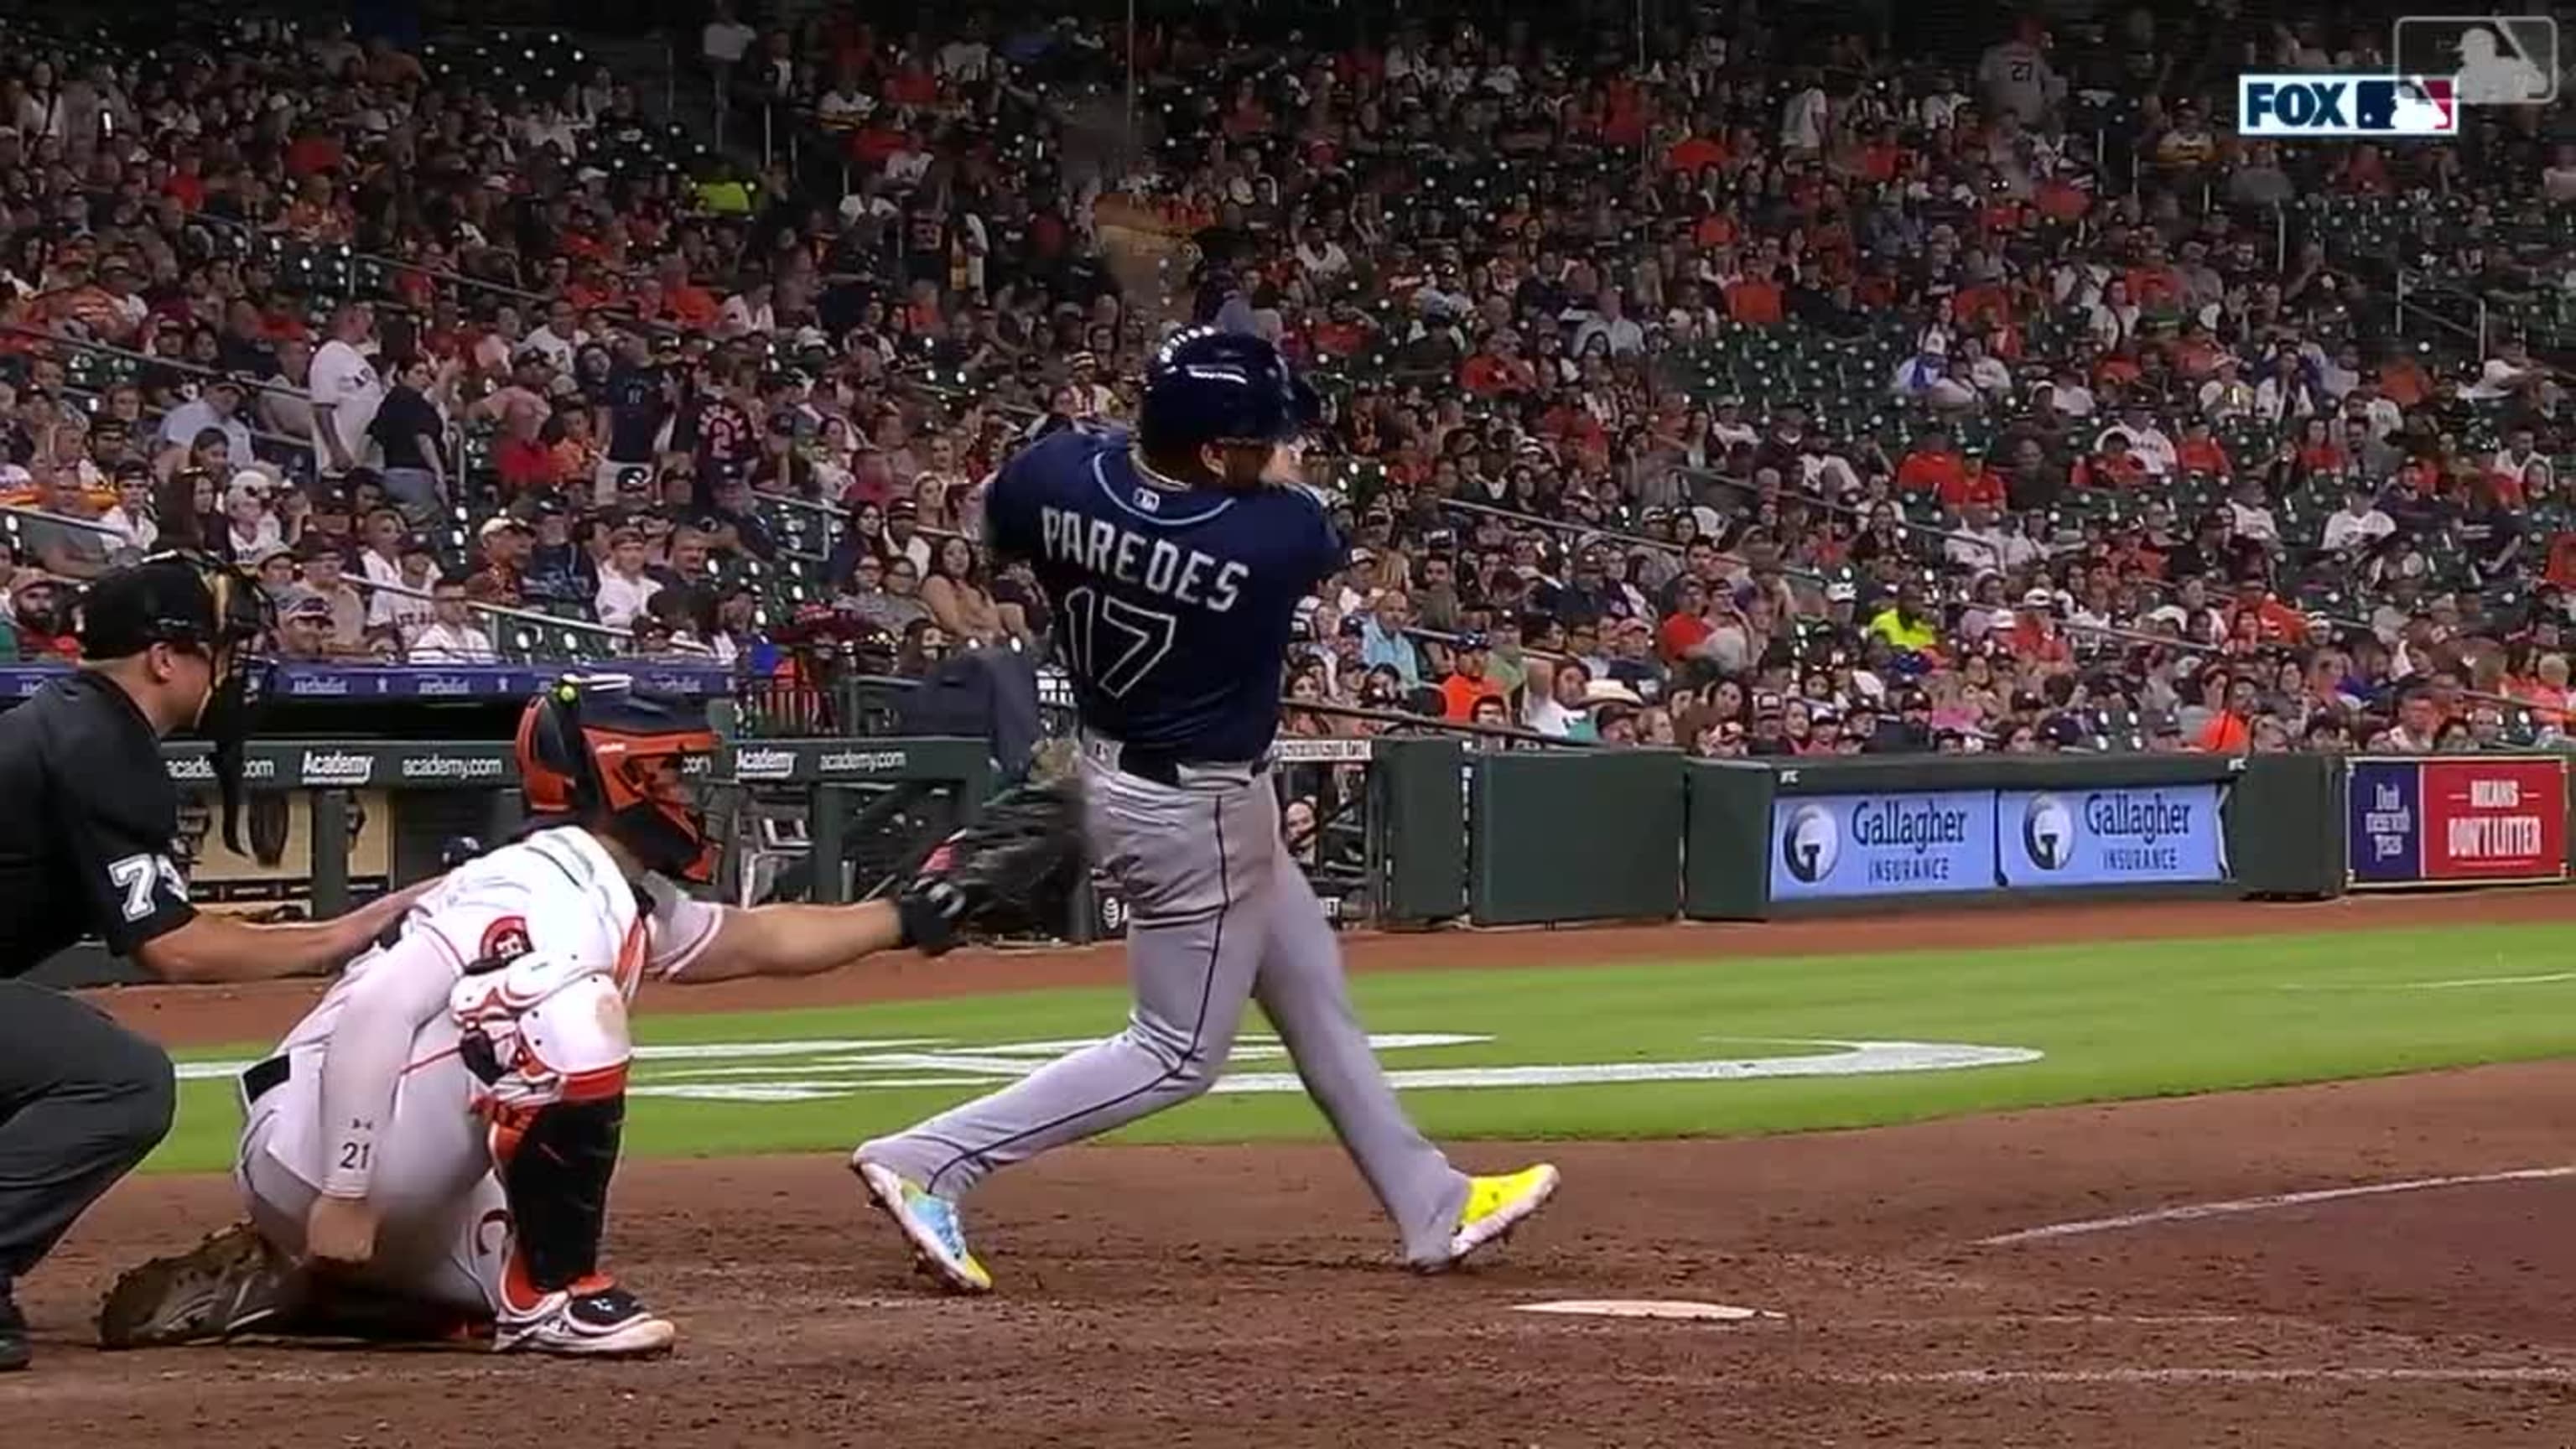 Rays Isaac Paredes excelling with pull power